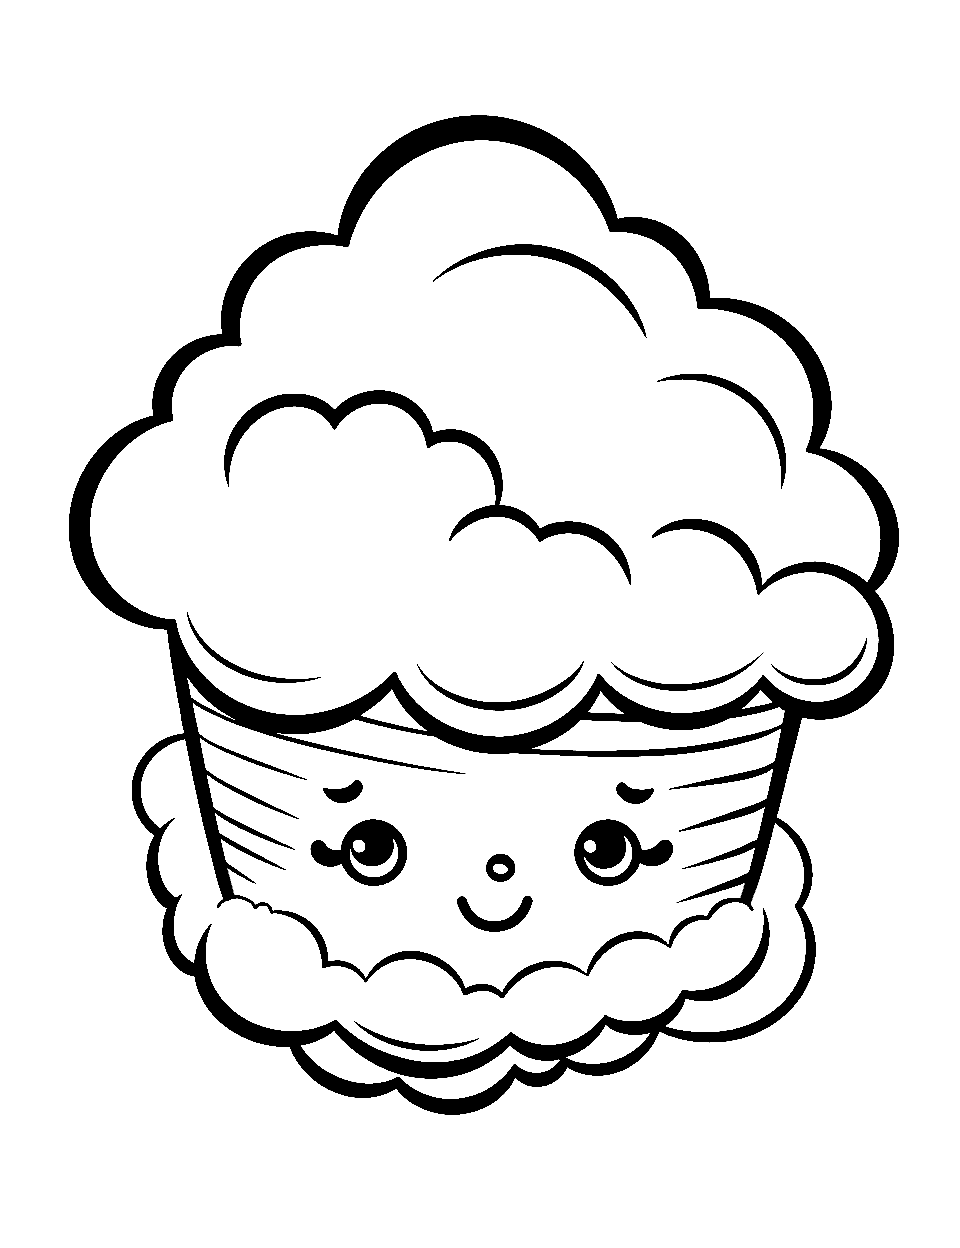 Fluffy Cloud Shopkin Coloring Page - A Shopkin looking like a fluffy cloud and shaped as one.